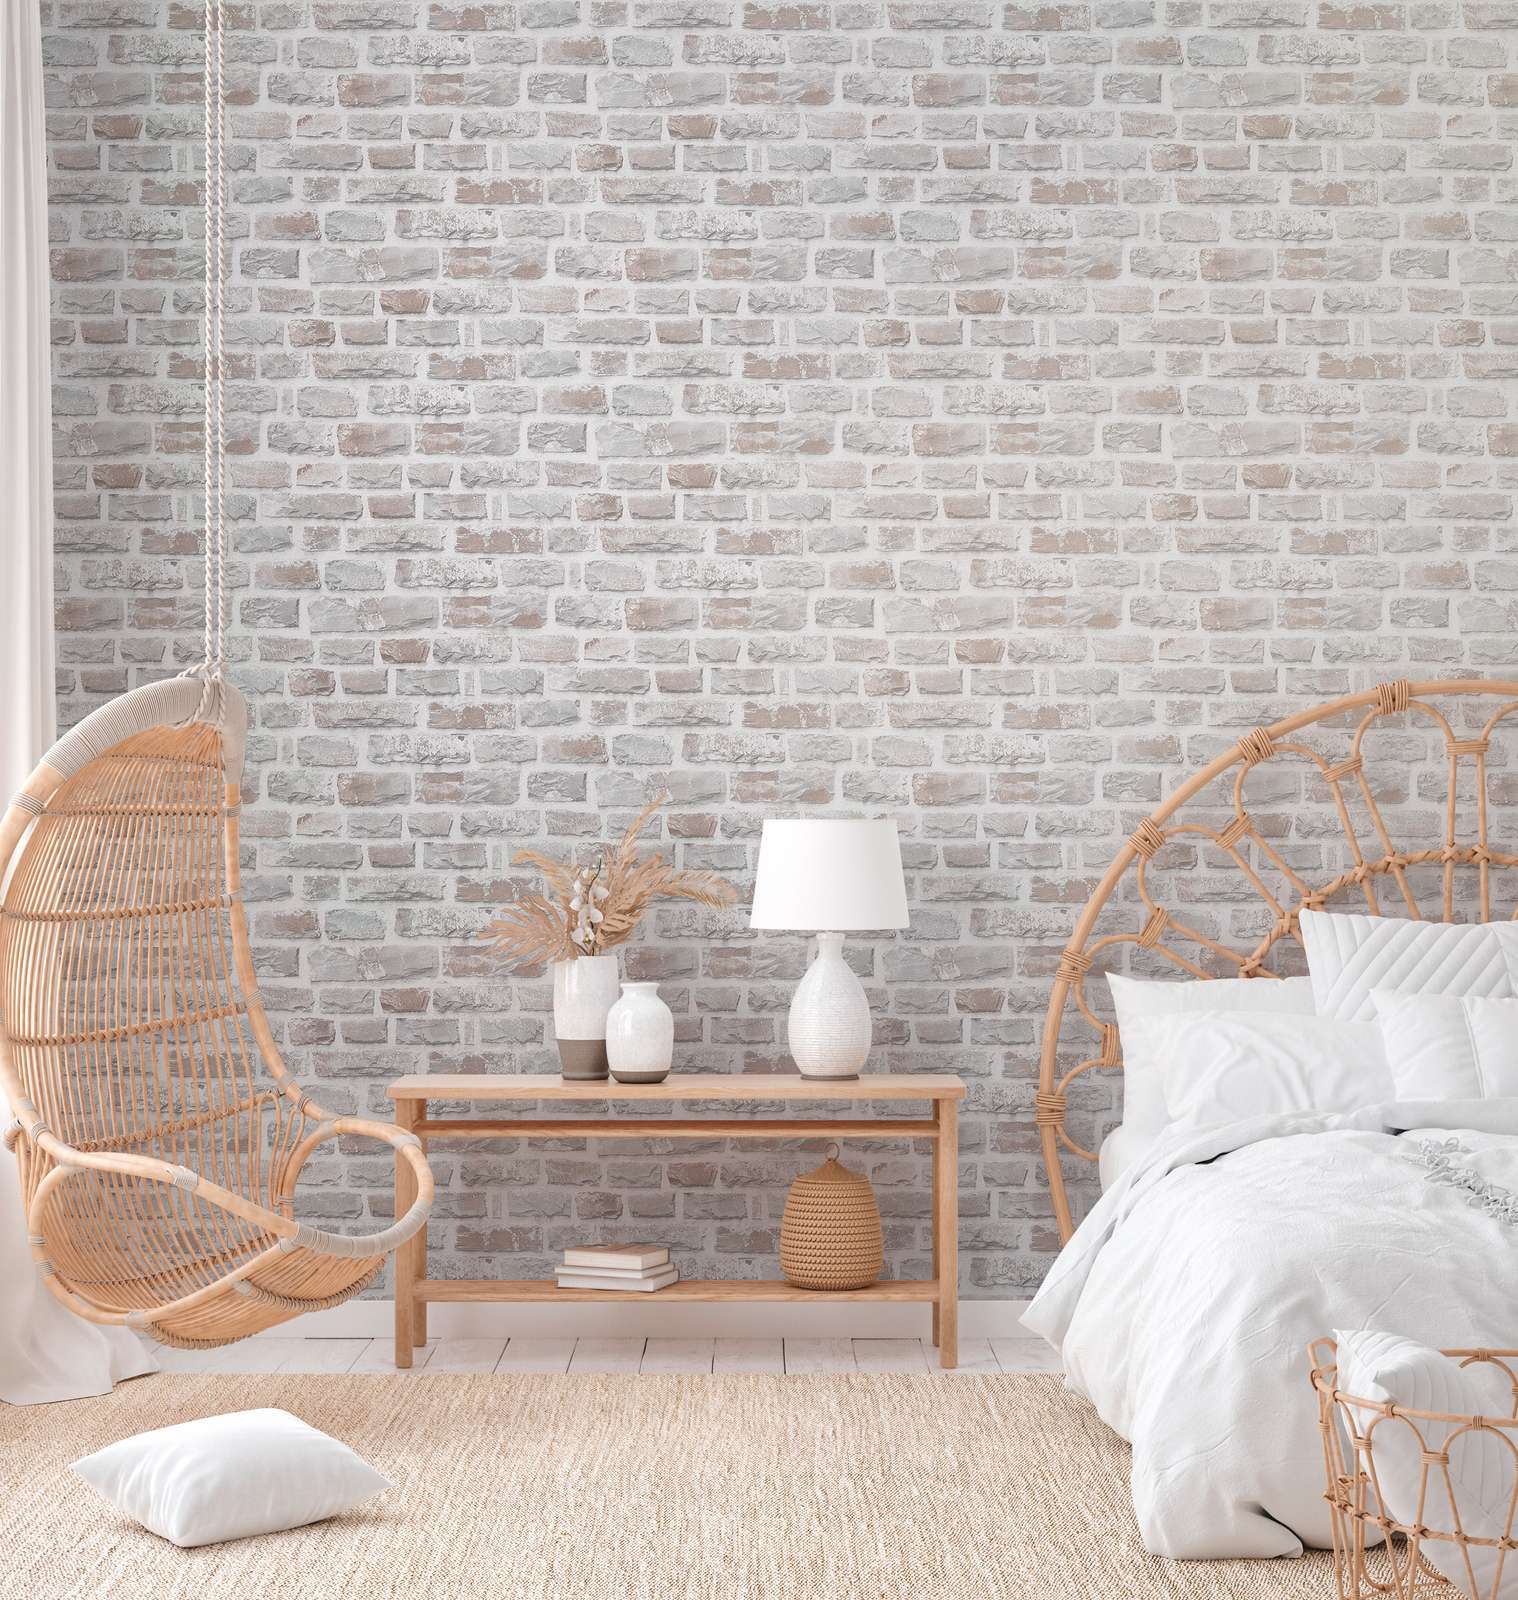             Non-woven wallpaper with natural stone wall PVC-free - grey, white
        